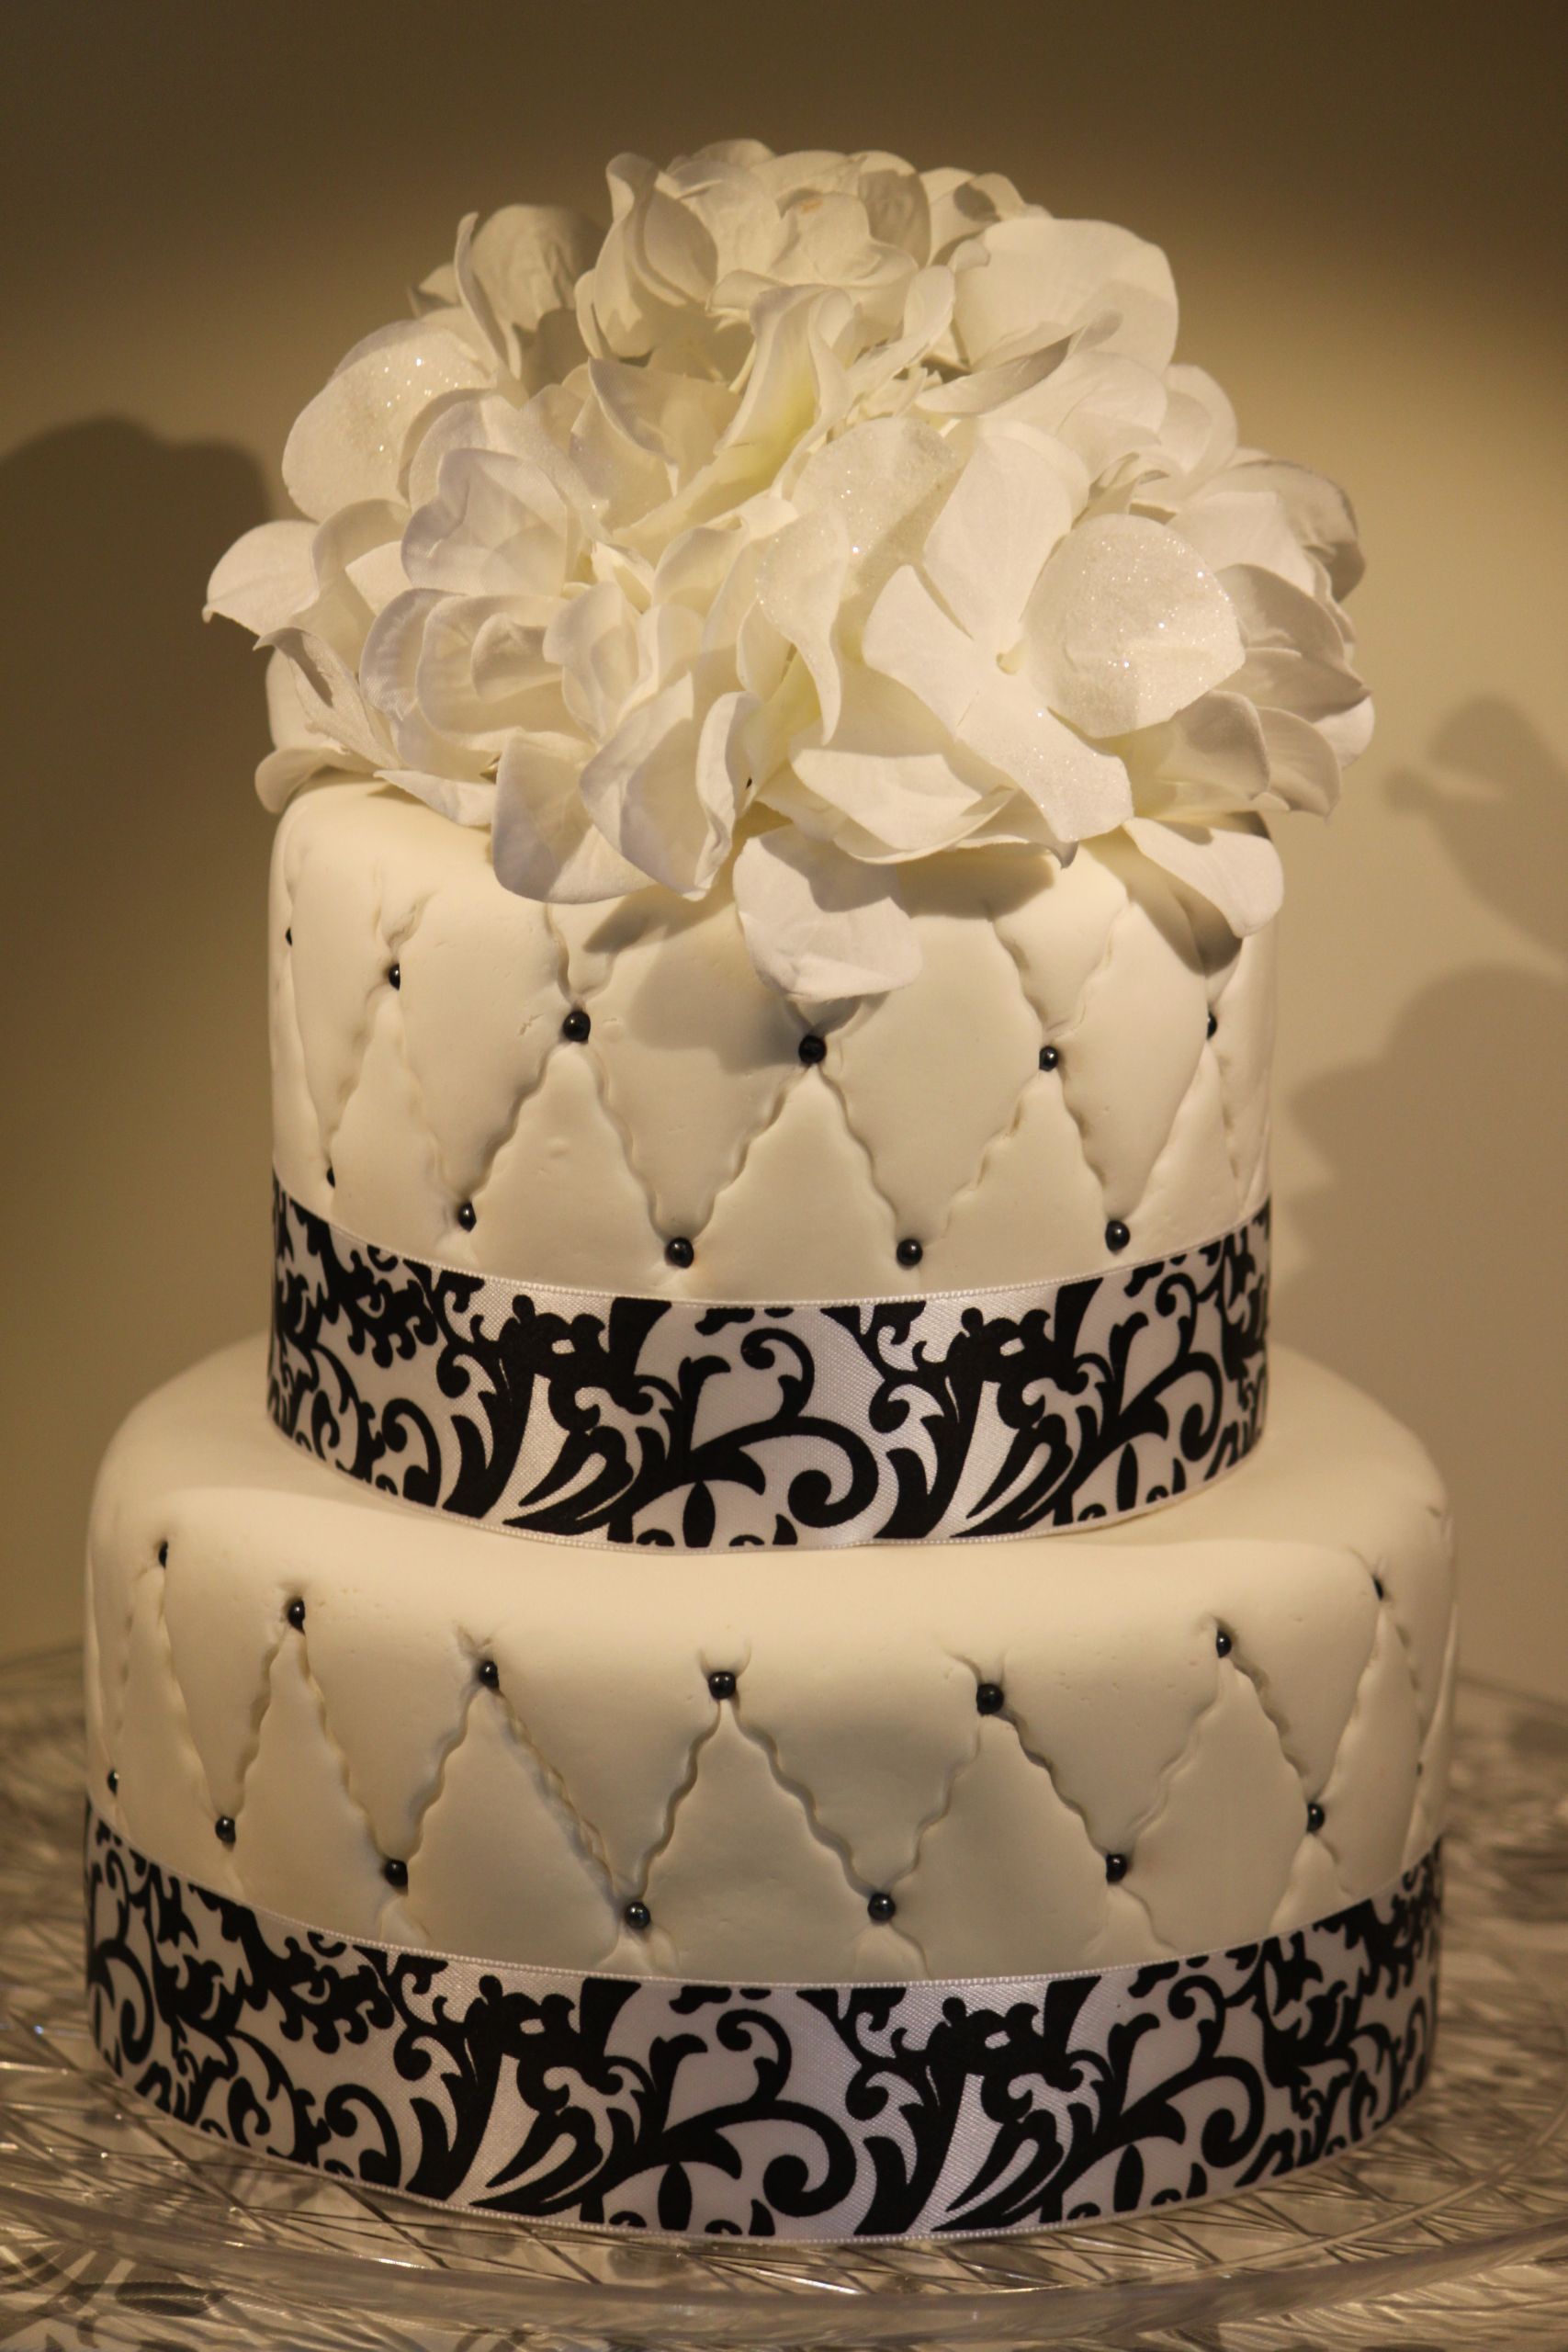 Black And White Birthday Cakes
 Black and White Quilted Fondant Birthday Cake